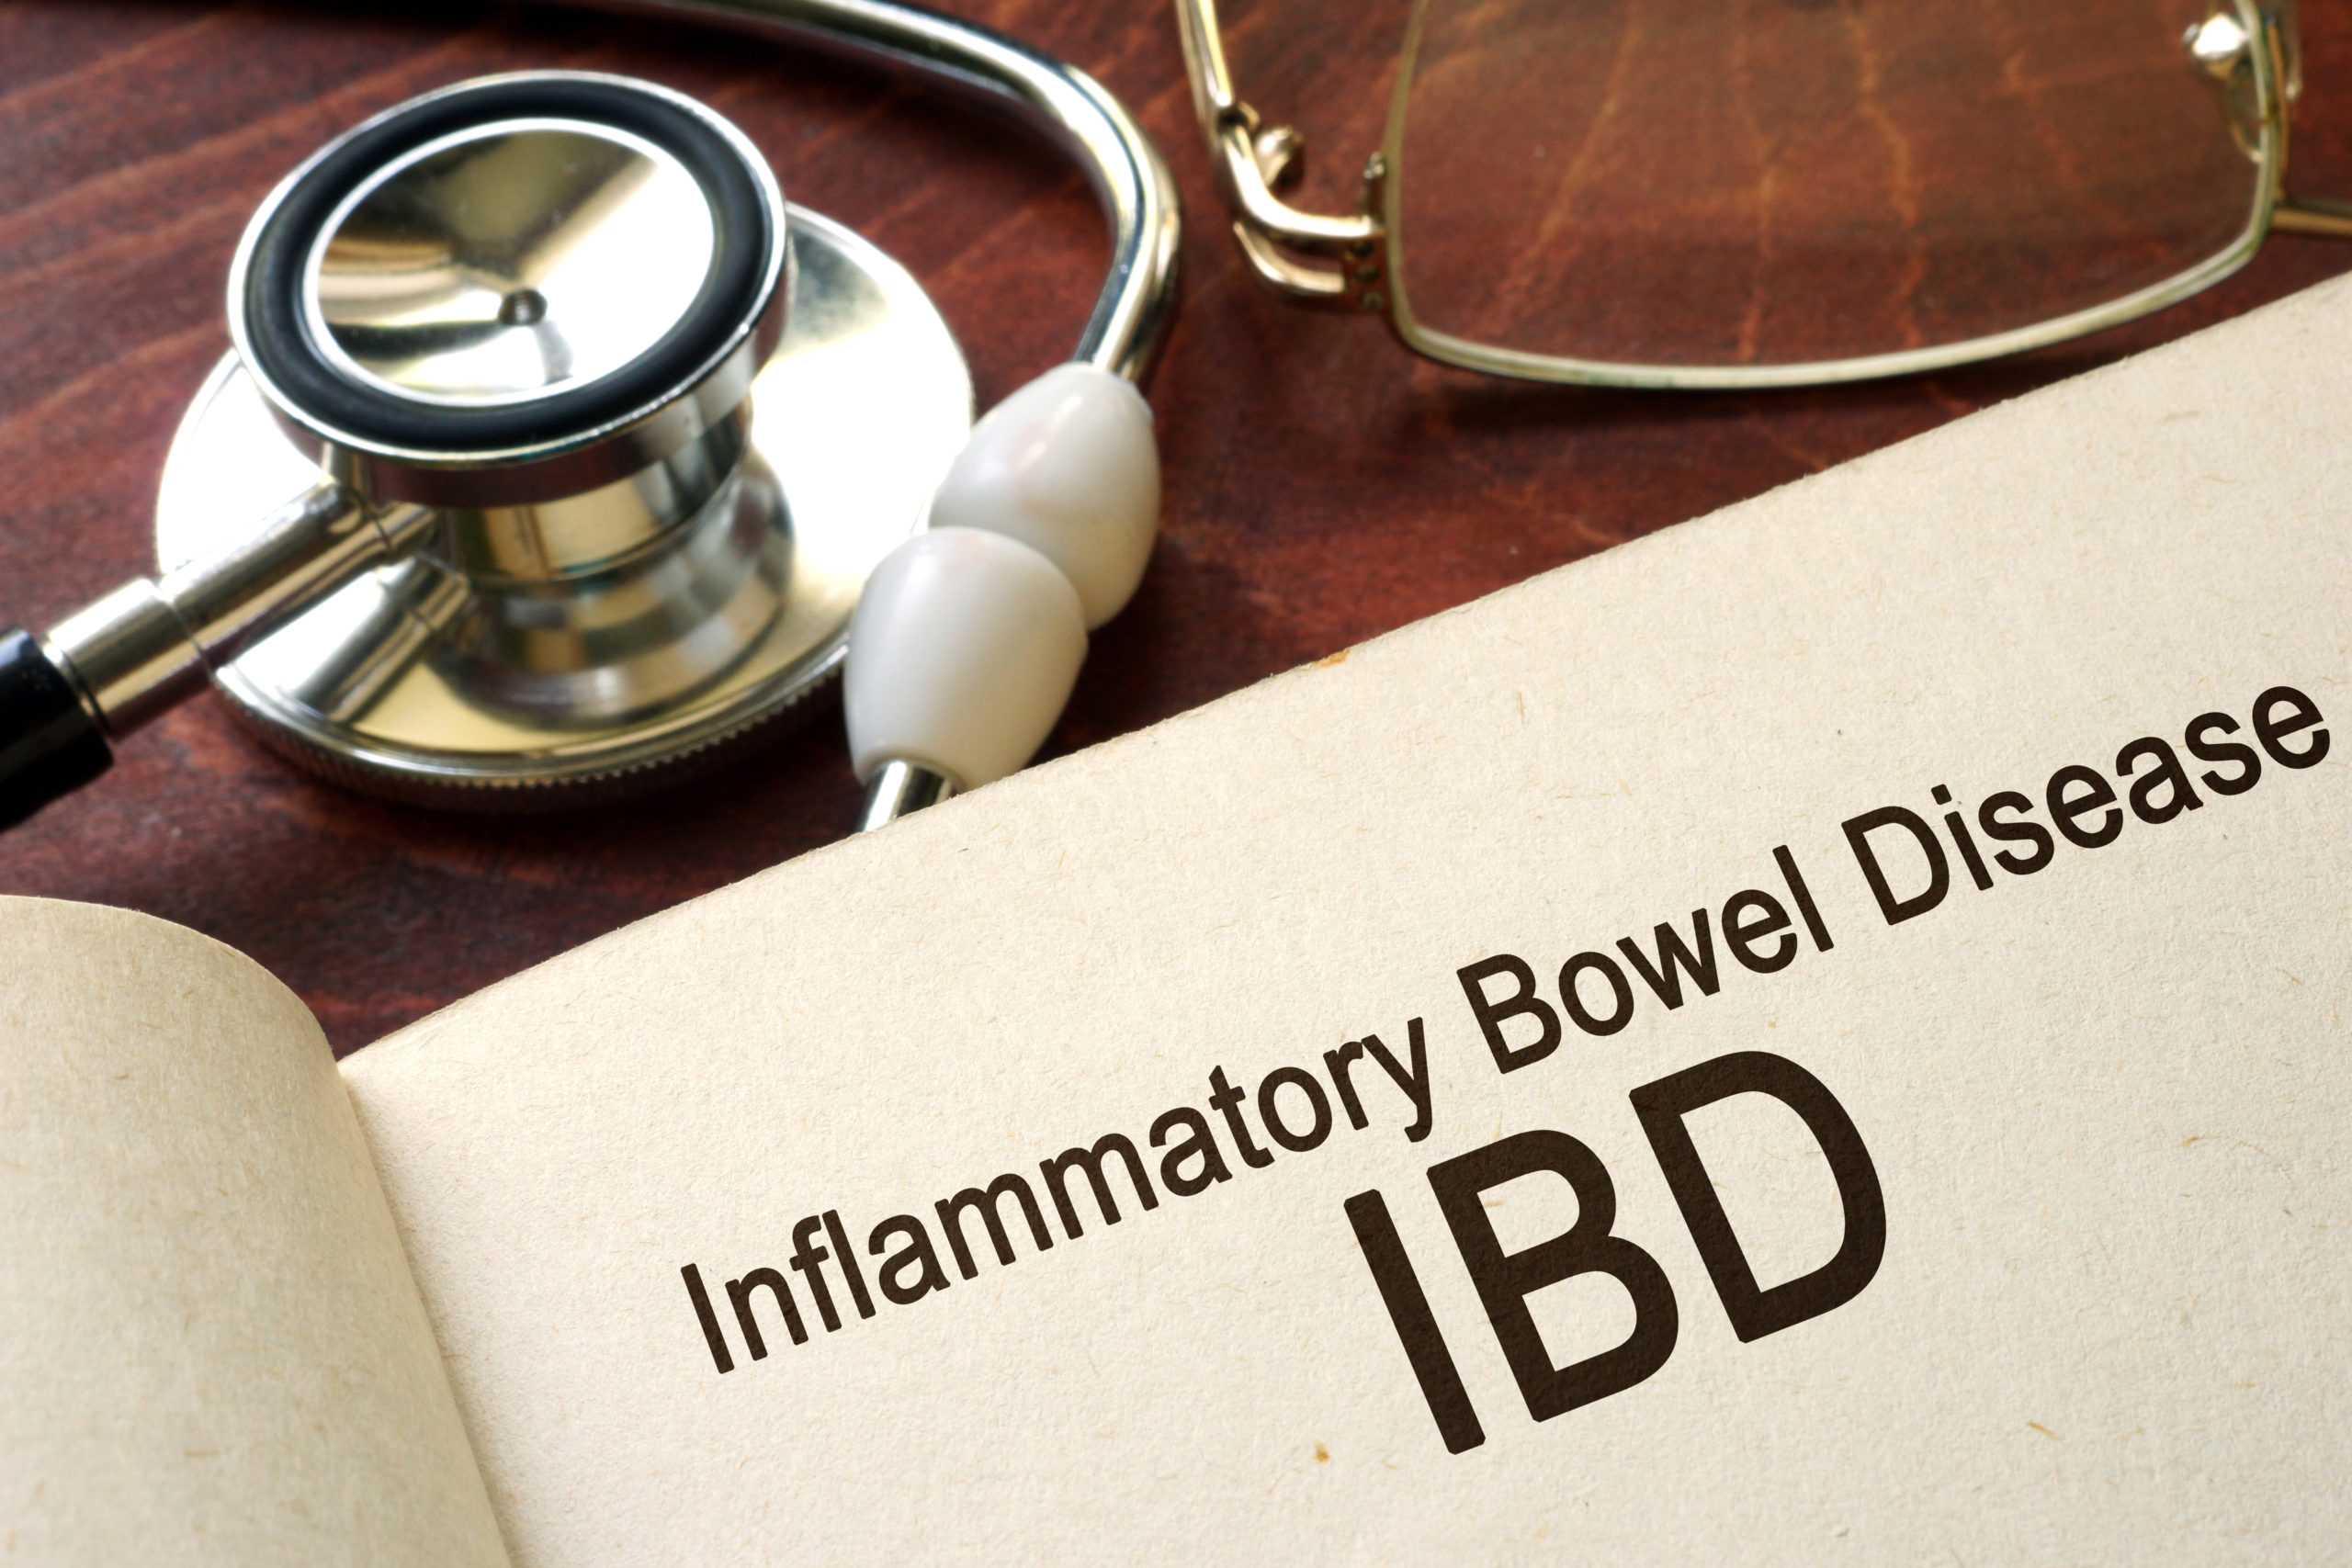 Book with words inflammatory bowel disease IBD on a table.